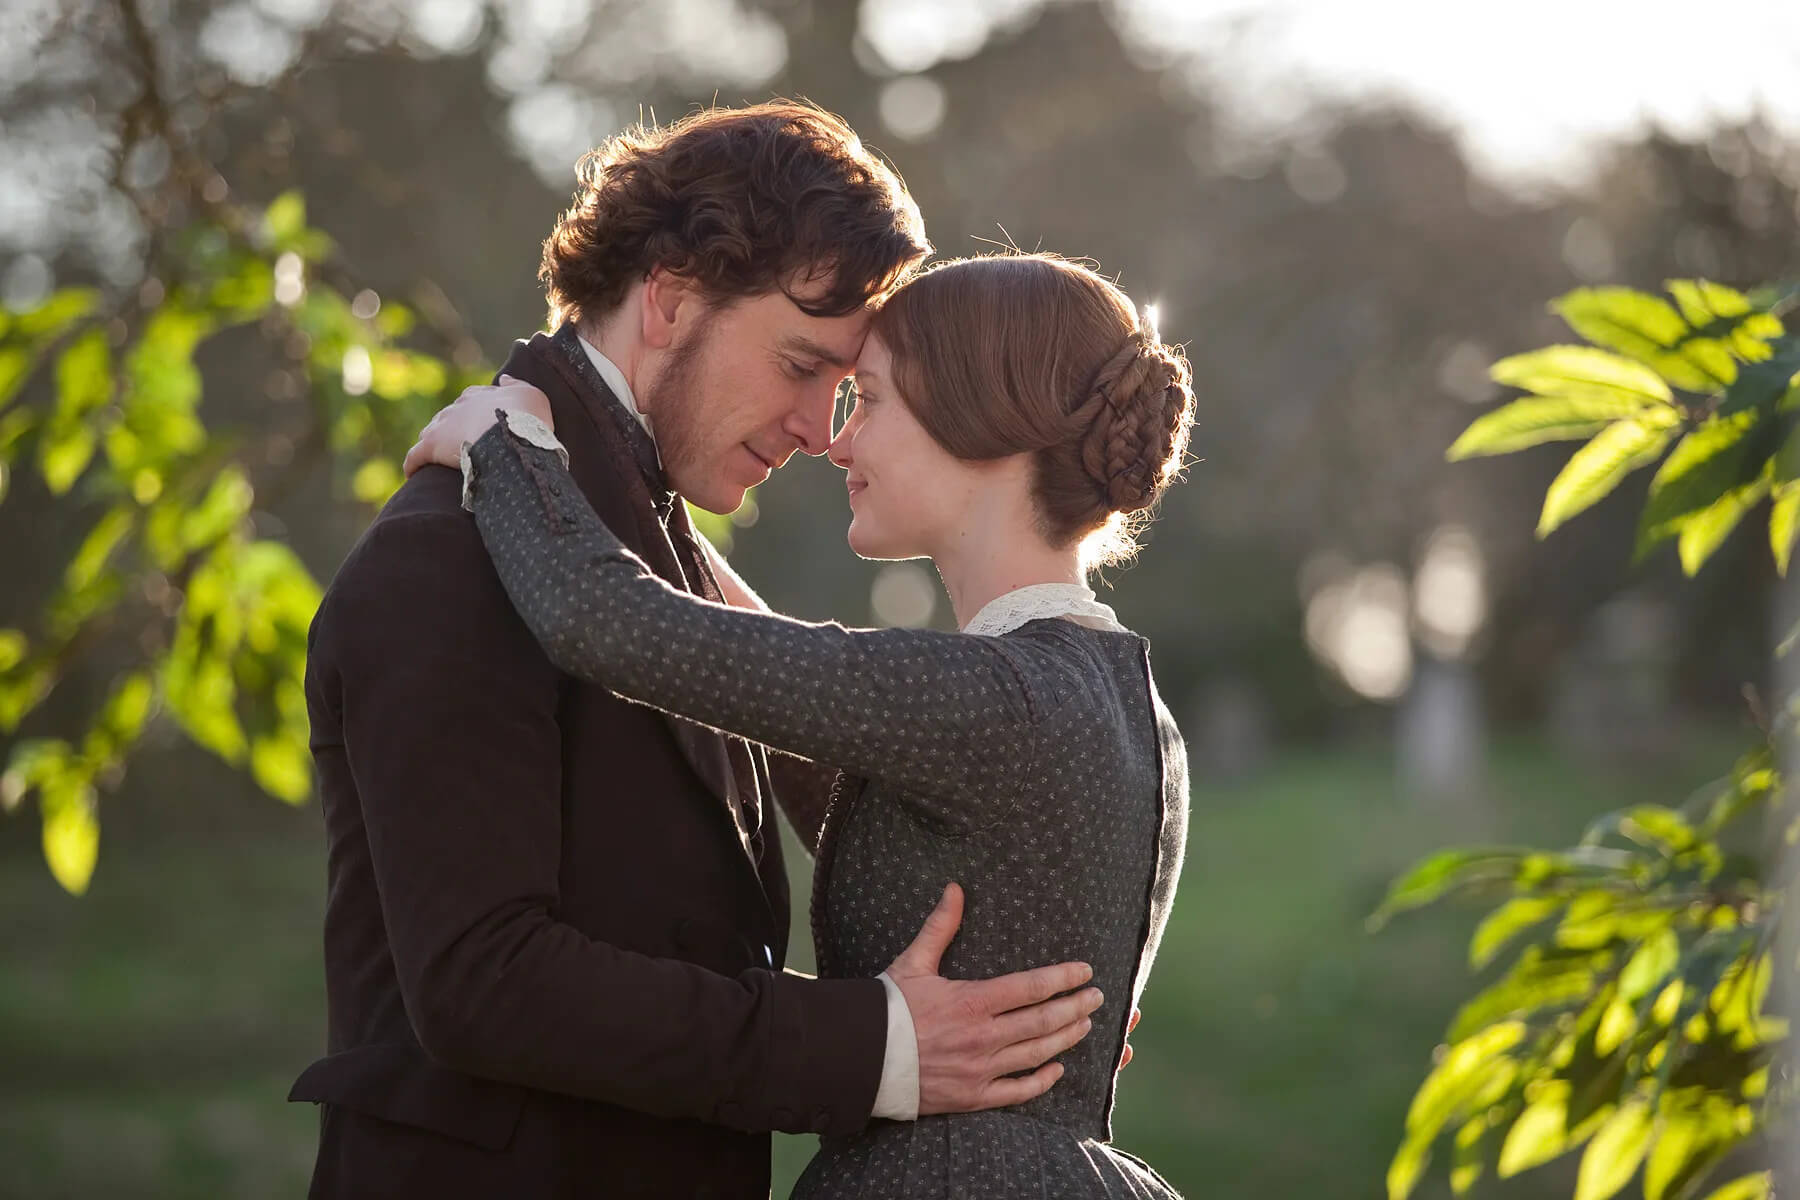 TV couples that are massive walking red flags Mr. Rochester and Jane — Jane Eyre